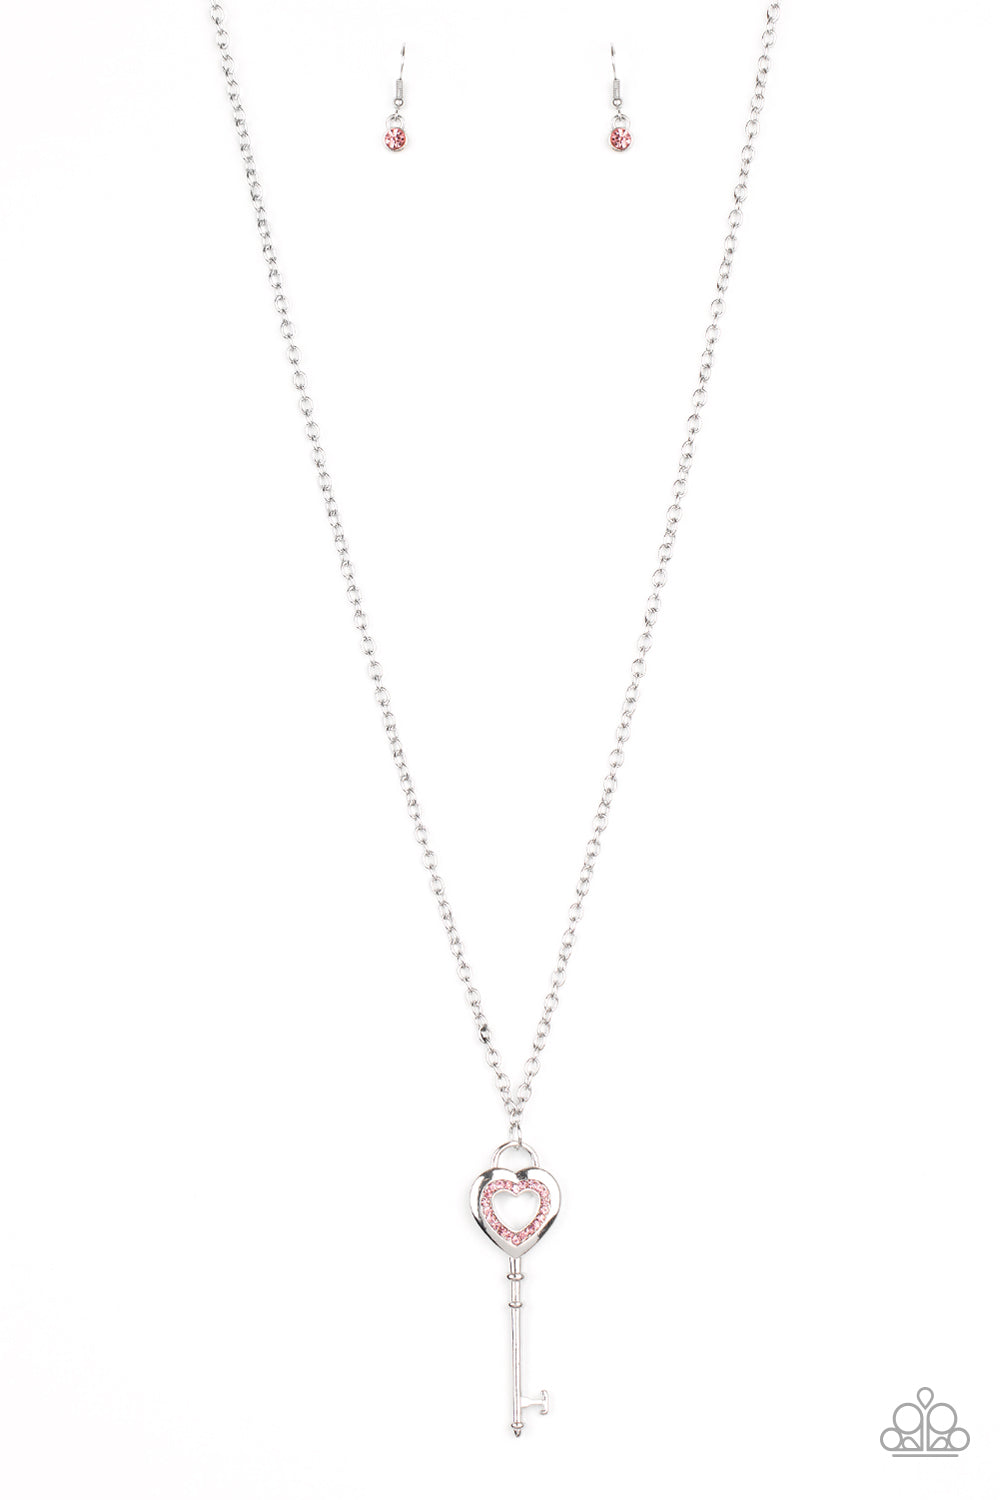 Unlock Your Heart - Pink necklace 866